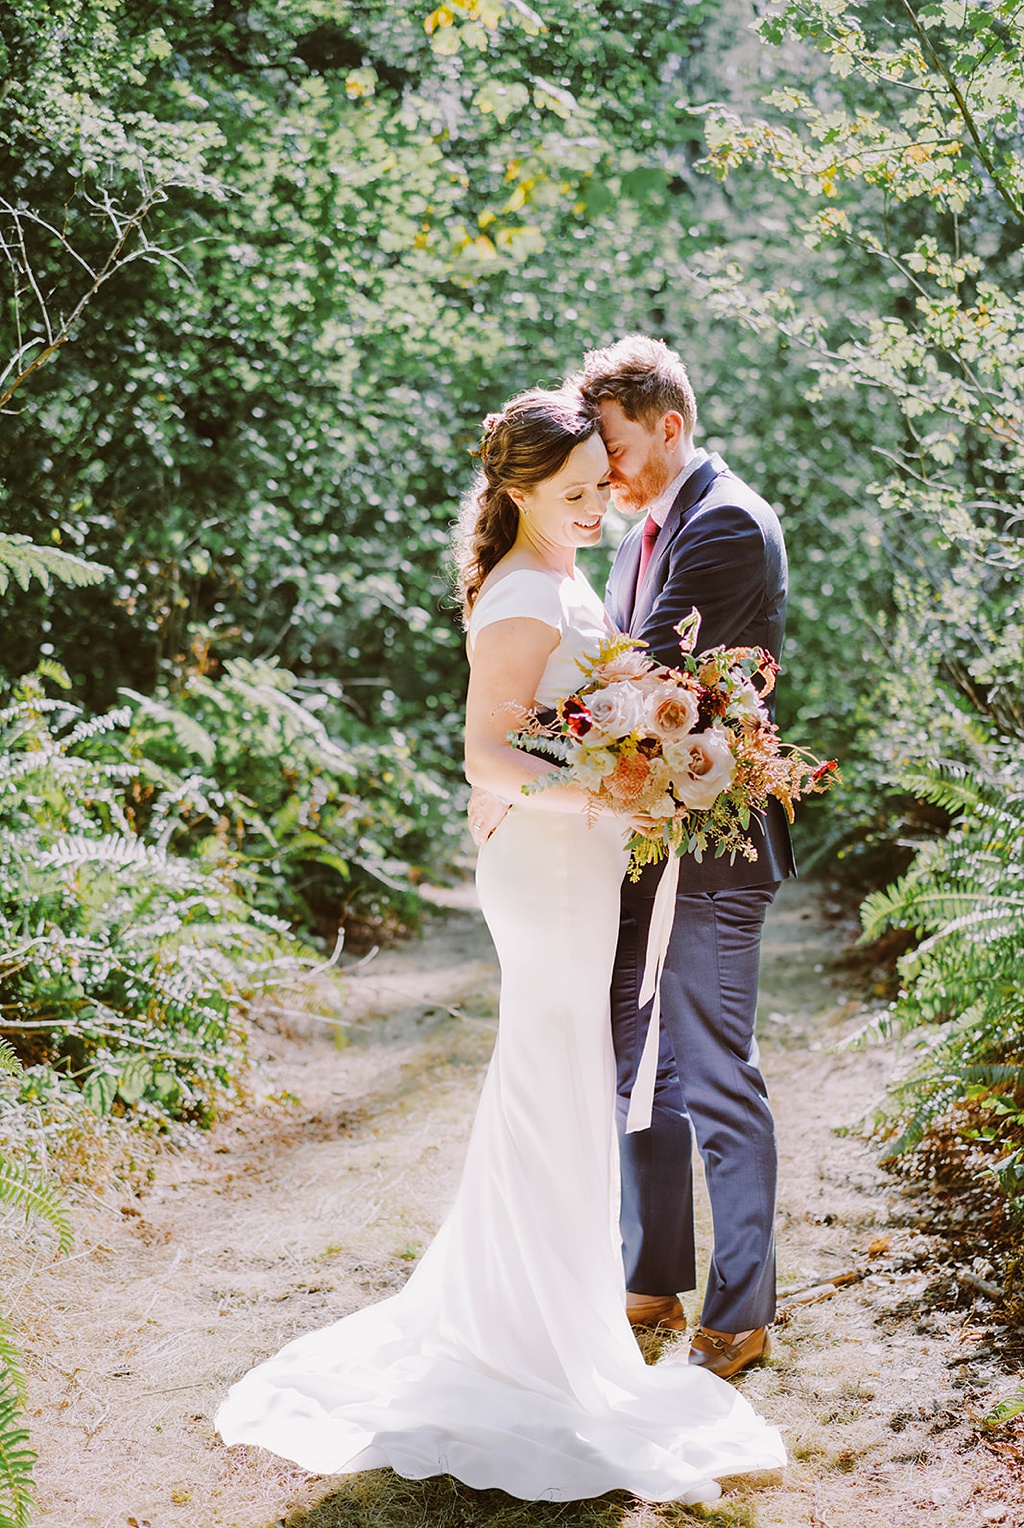 The couple stands in the woods, holding a summer wedding bouquet 